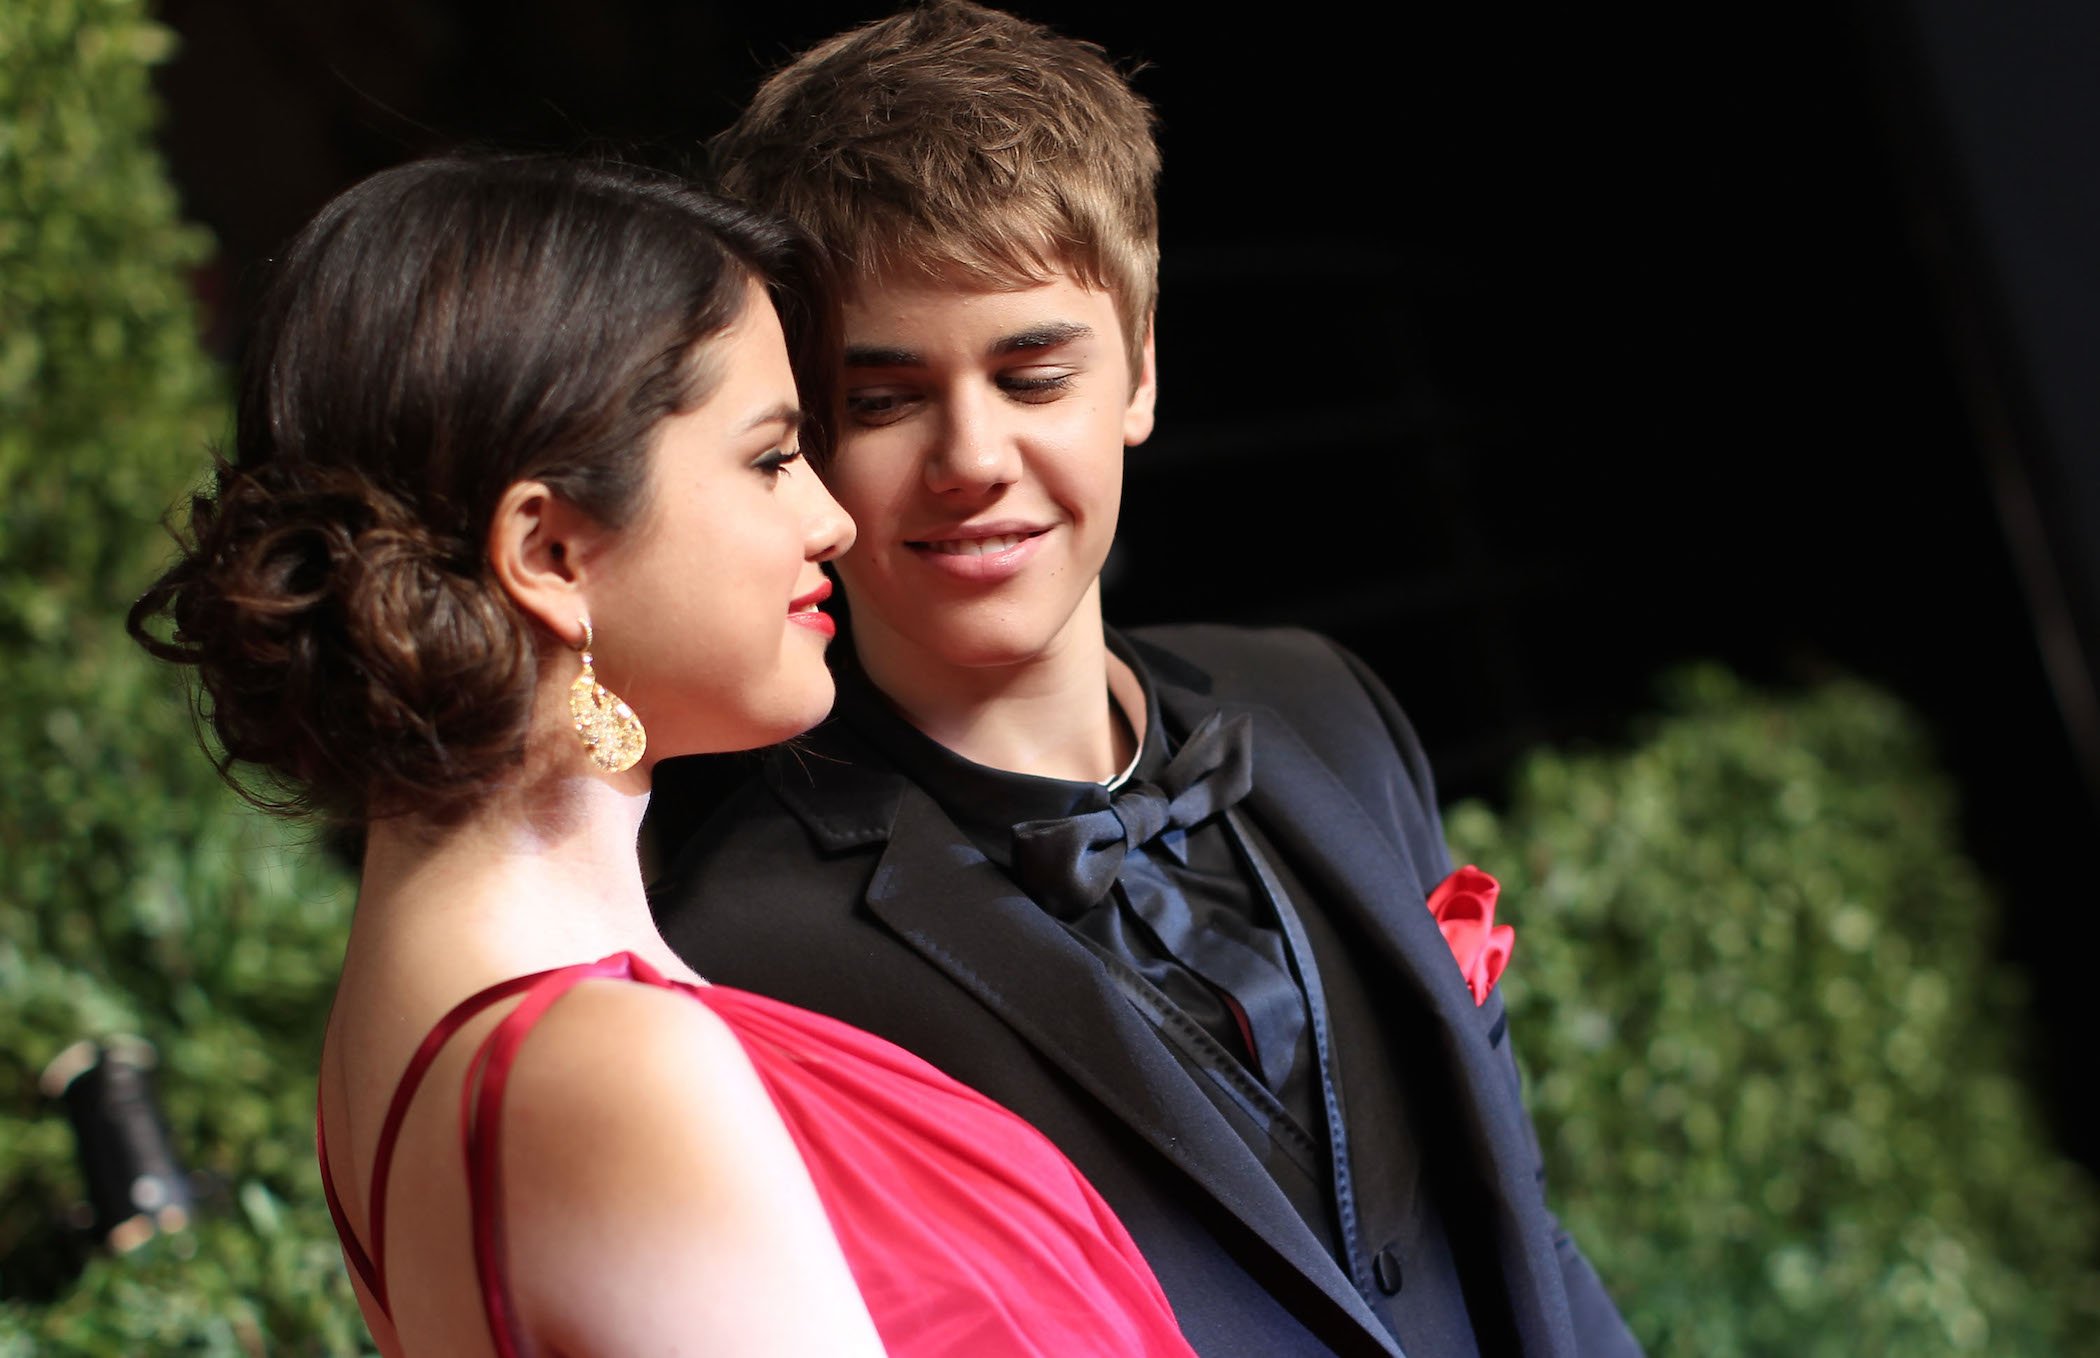 Selena Gomez and Justin Bieber attend the 2011 Vanity Fair Oscar Party in 2011 